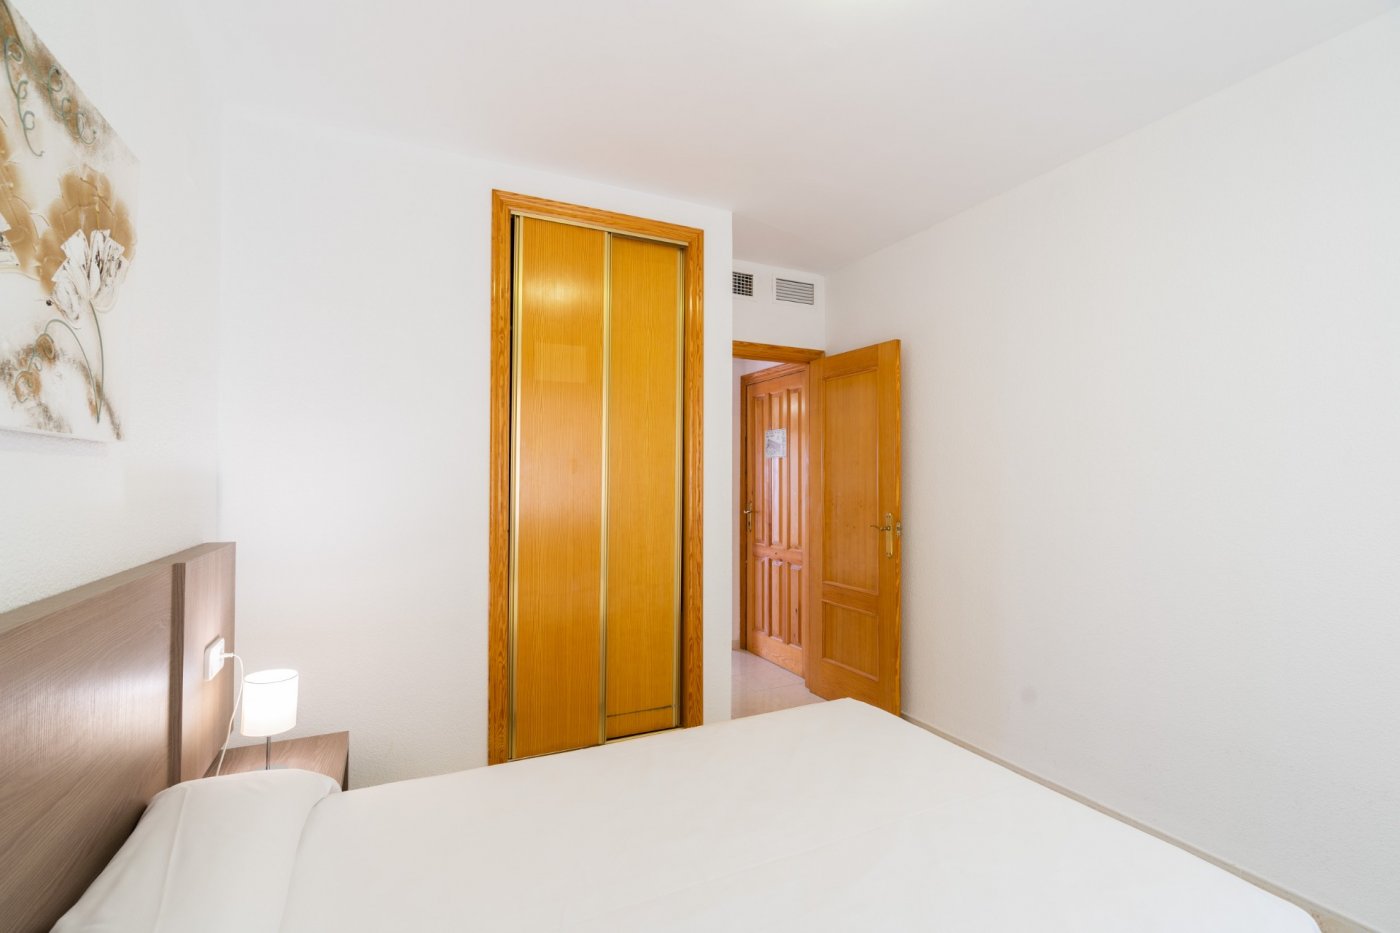 Townhouse for sale in Calpe 12